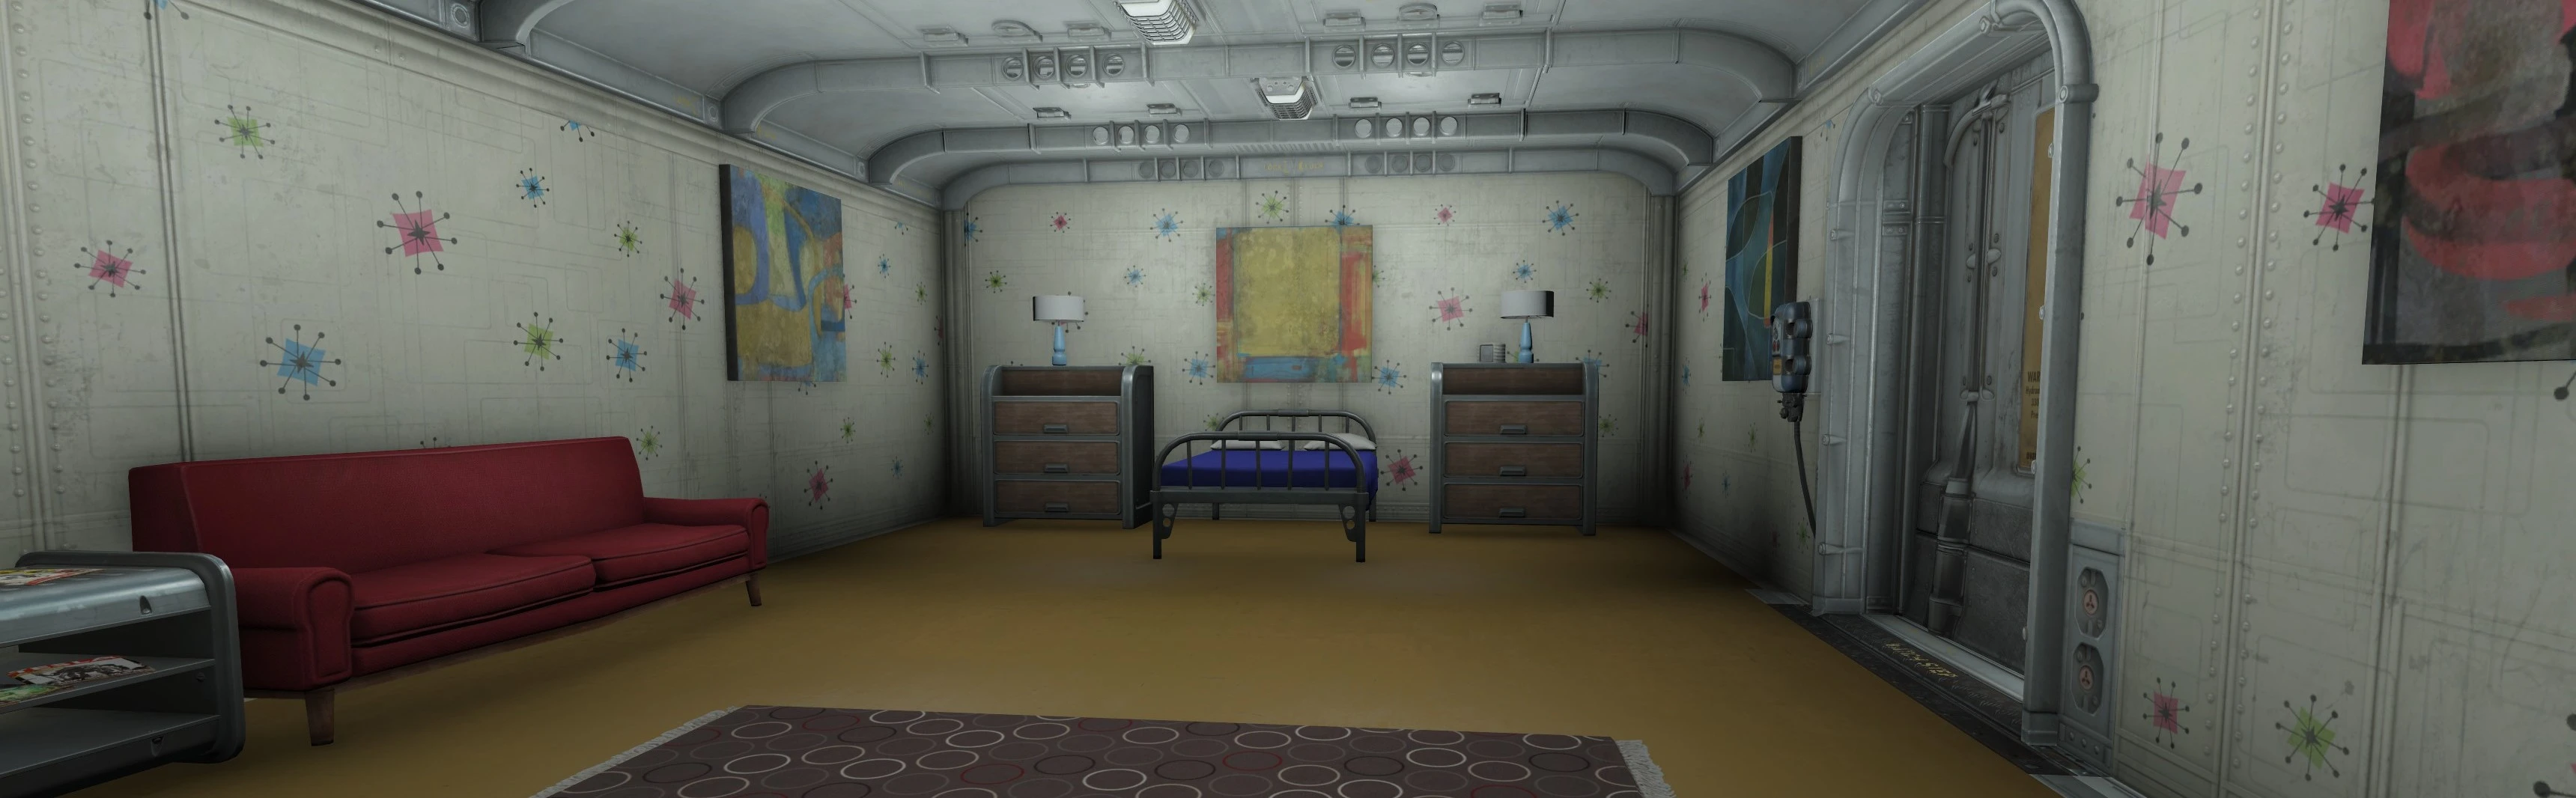 More vault rooms fallout 4 фото 7